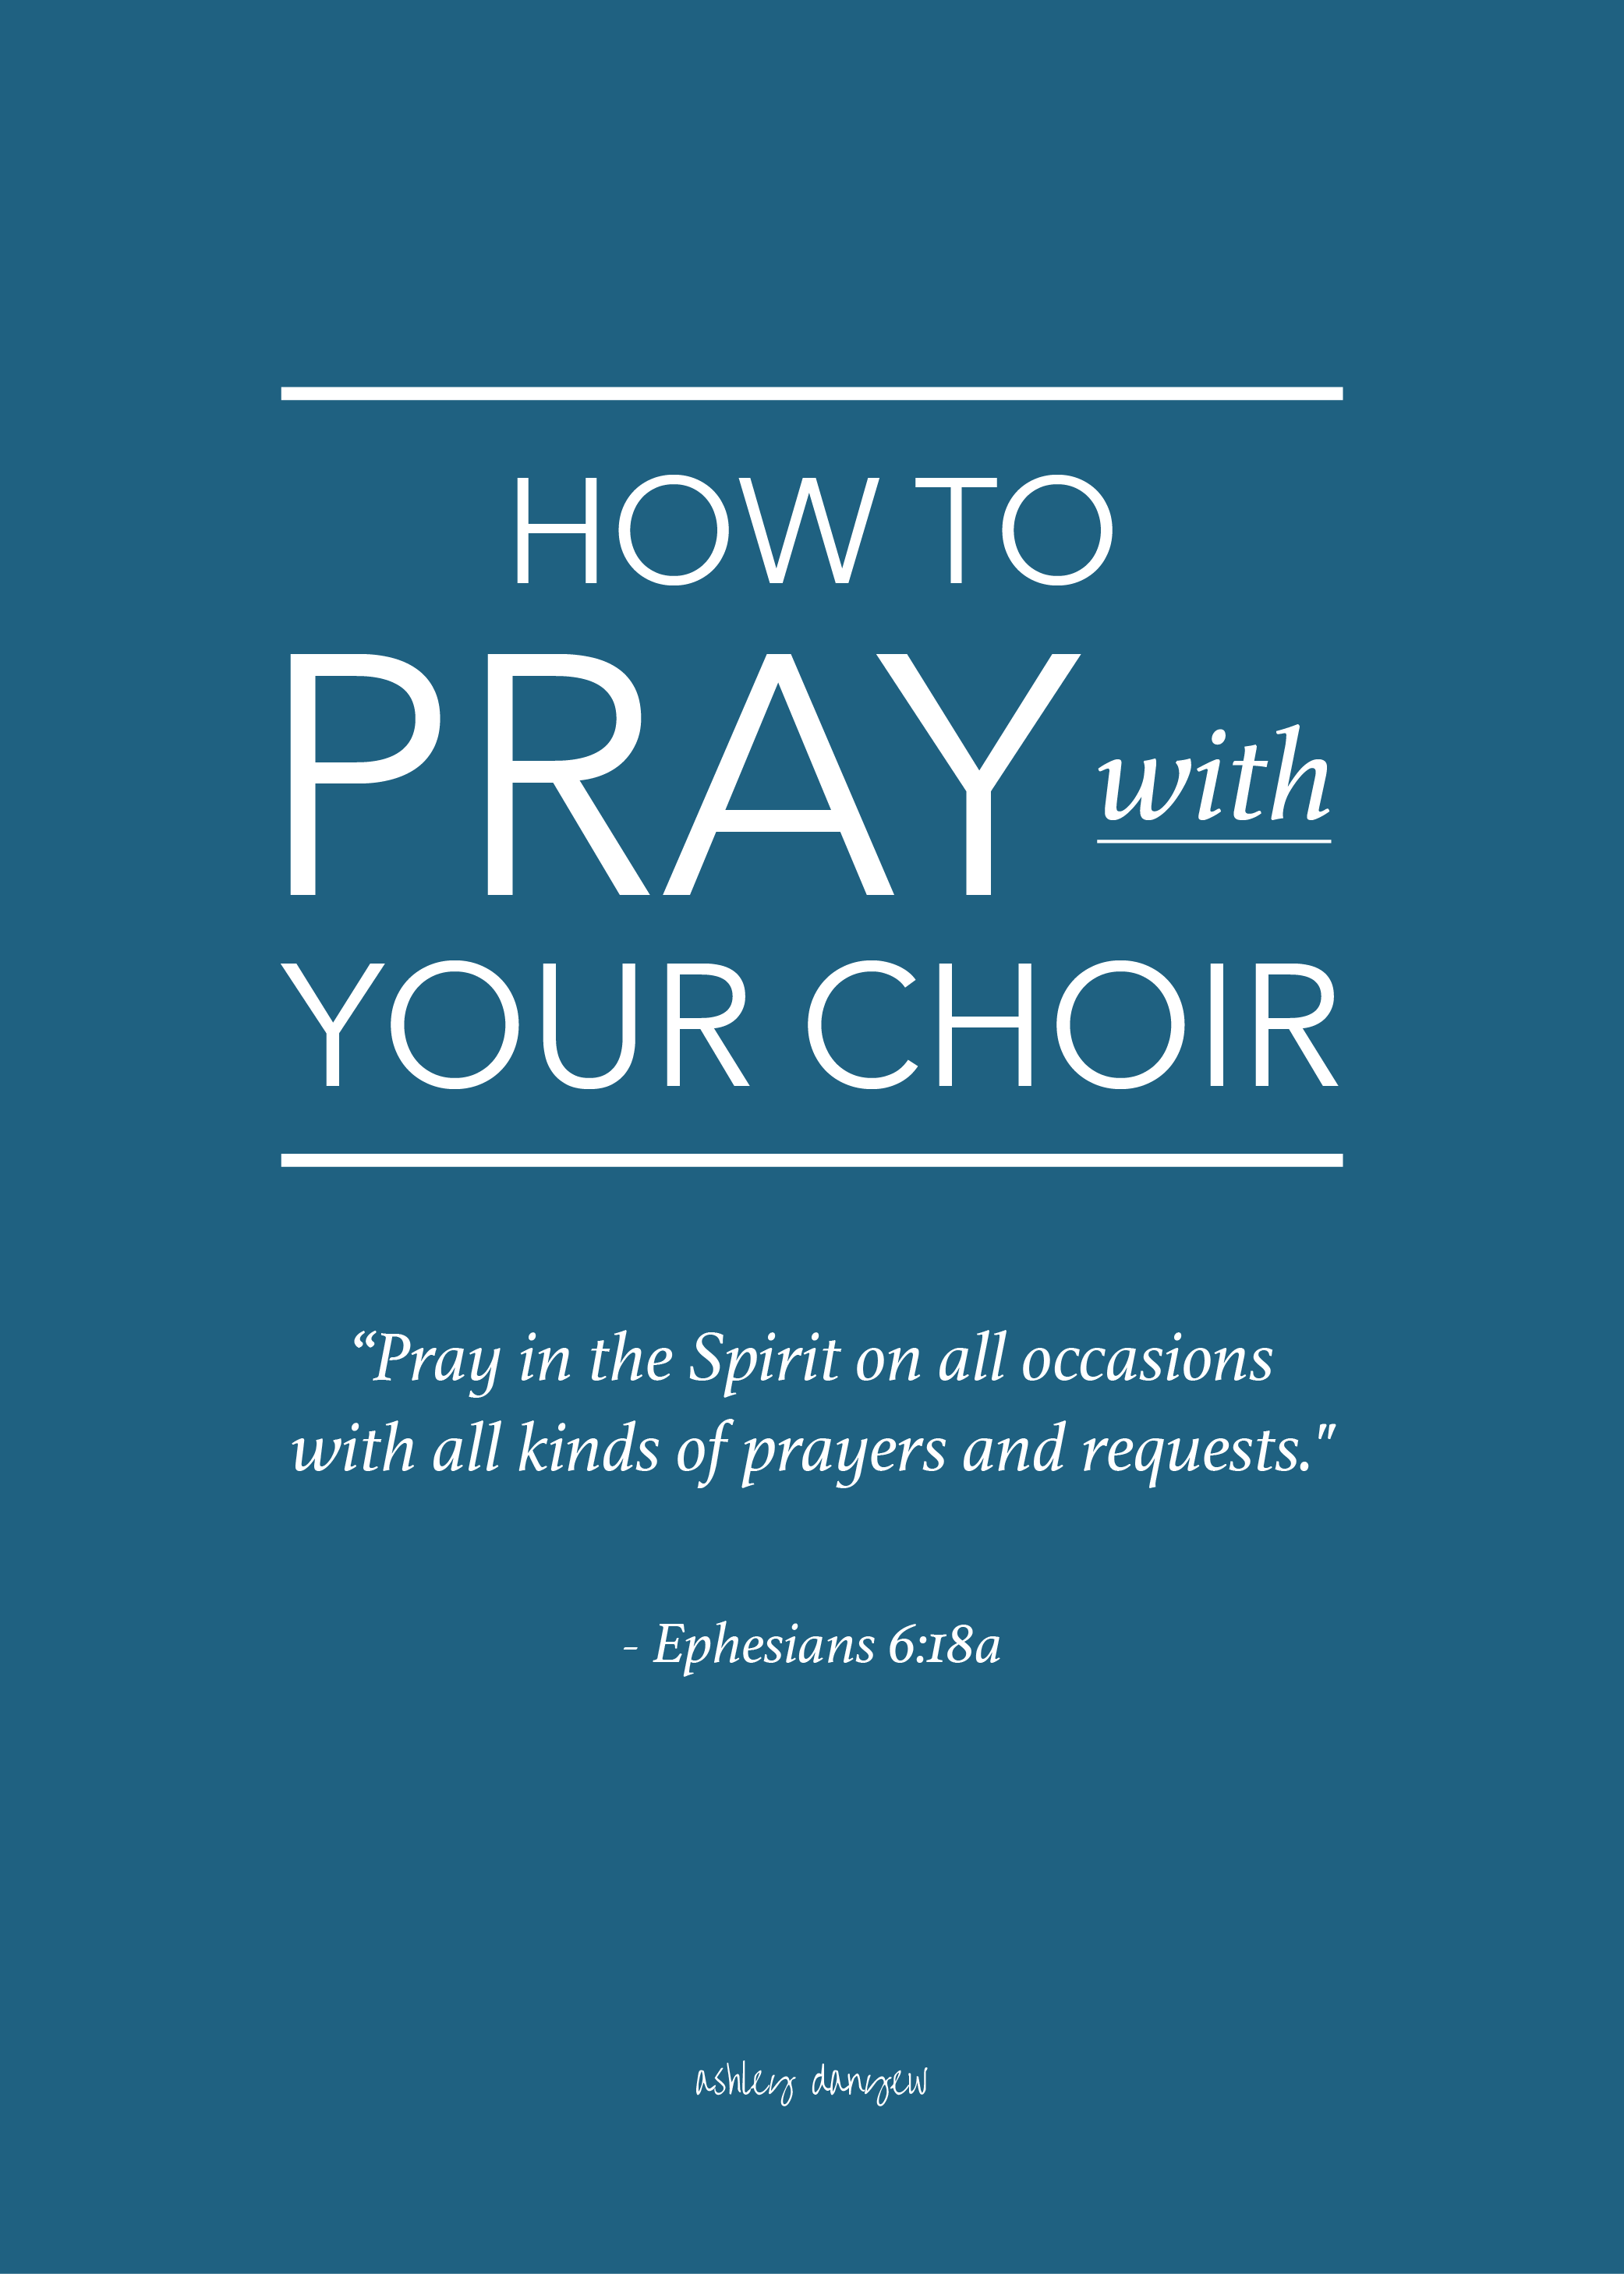 Copy of How to Pray With Your Choir